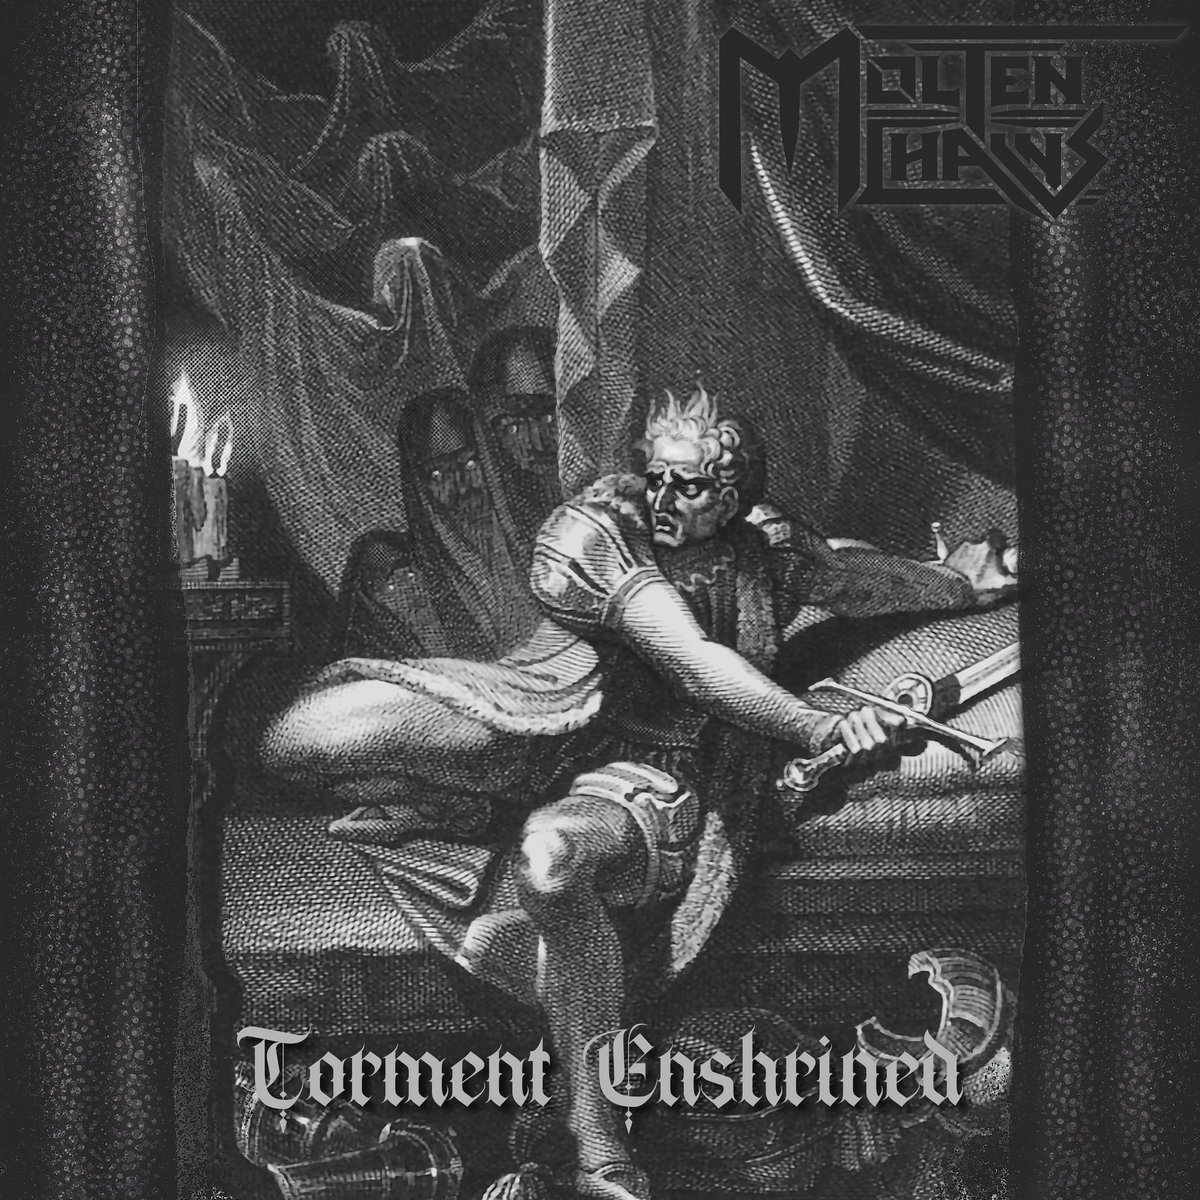 Interview with MOLTEN CHAINS